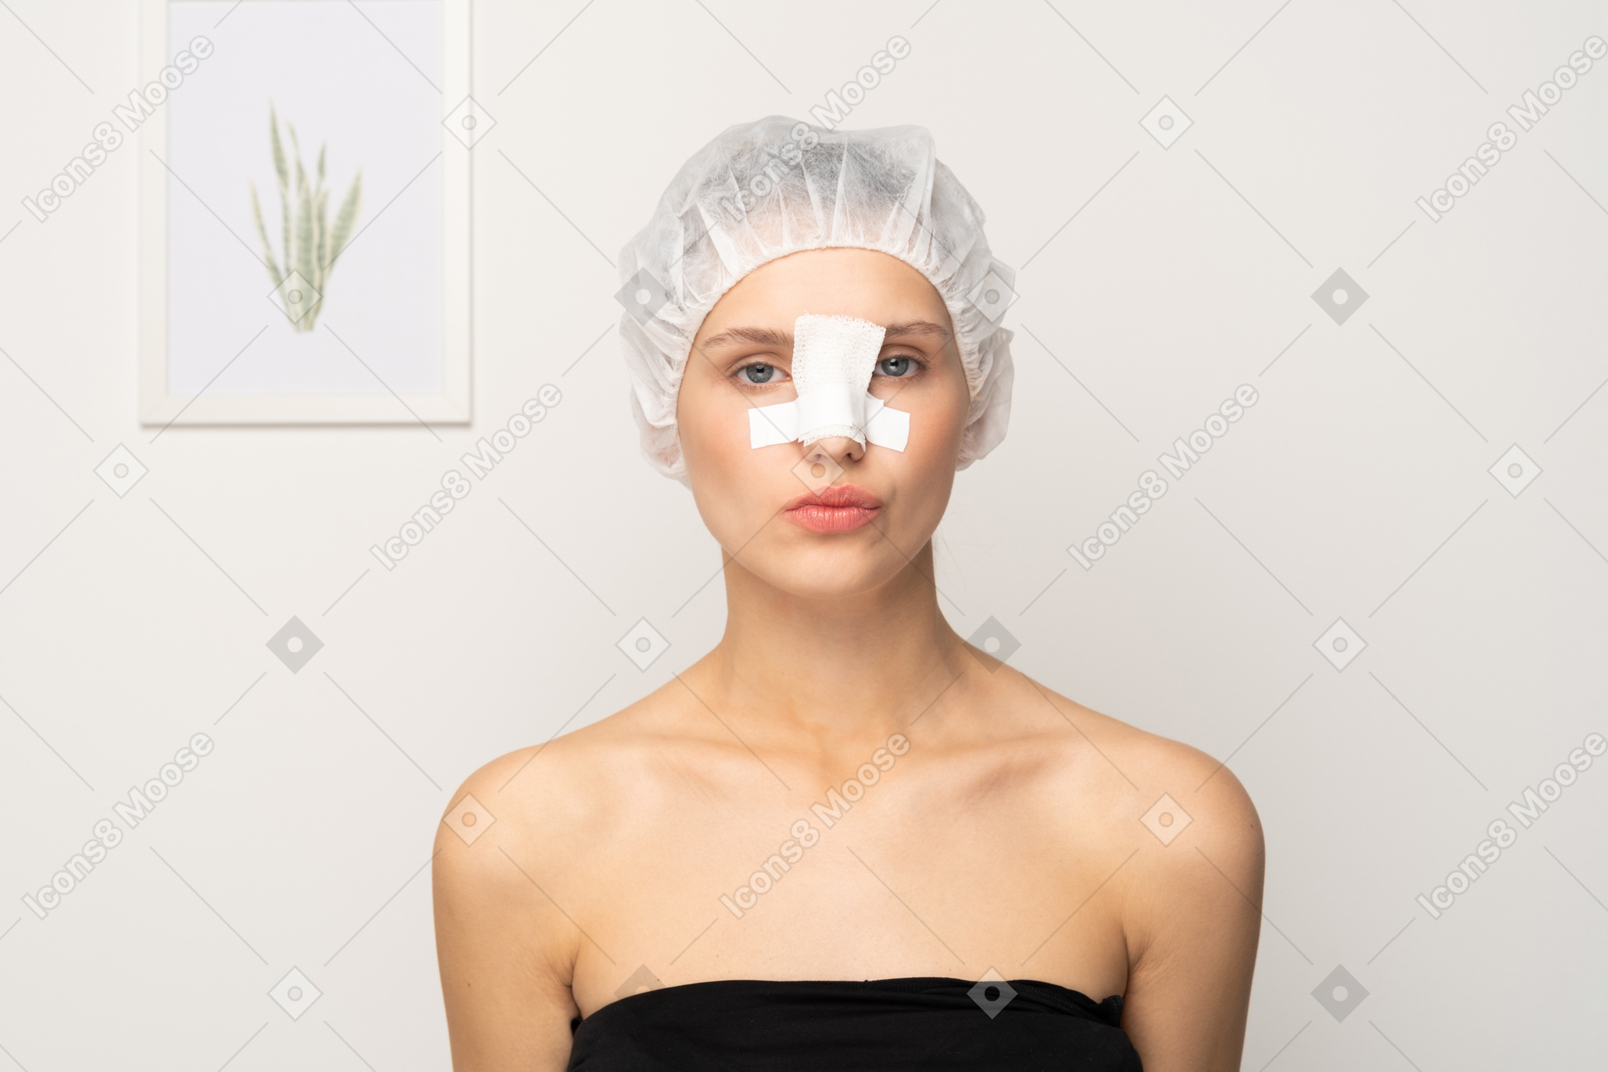 Female patient in medical cap with an adhesive bandage on her nose